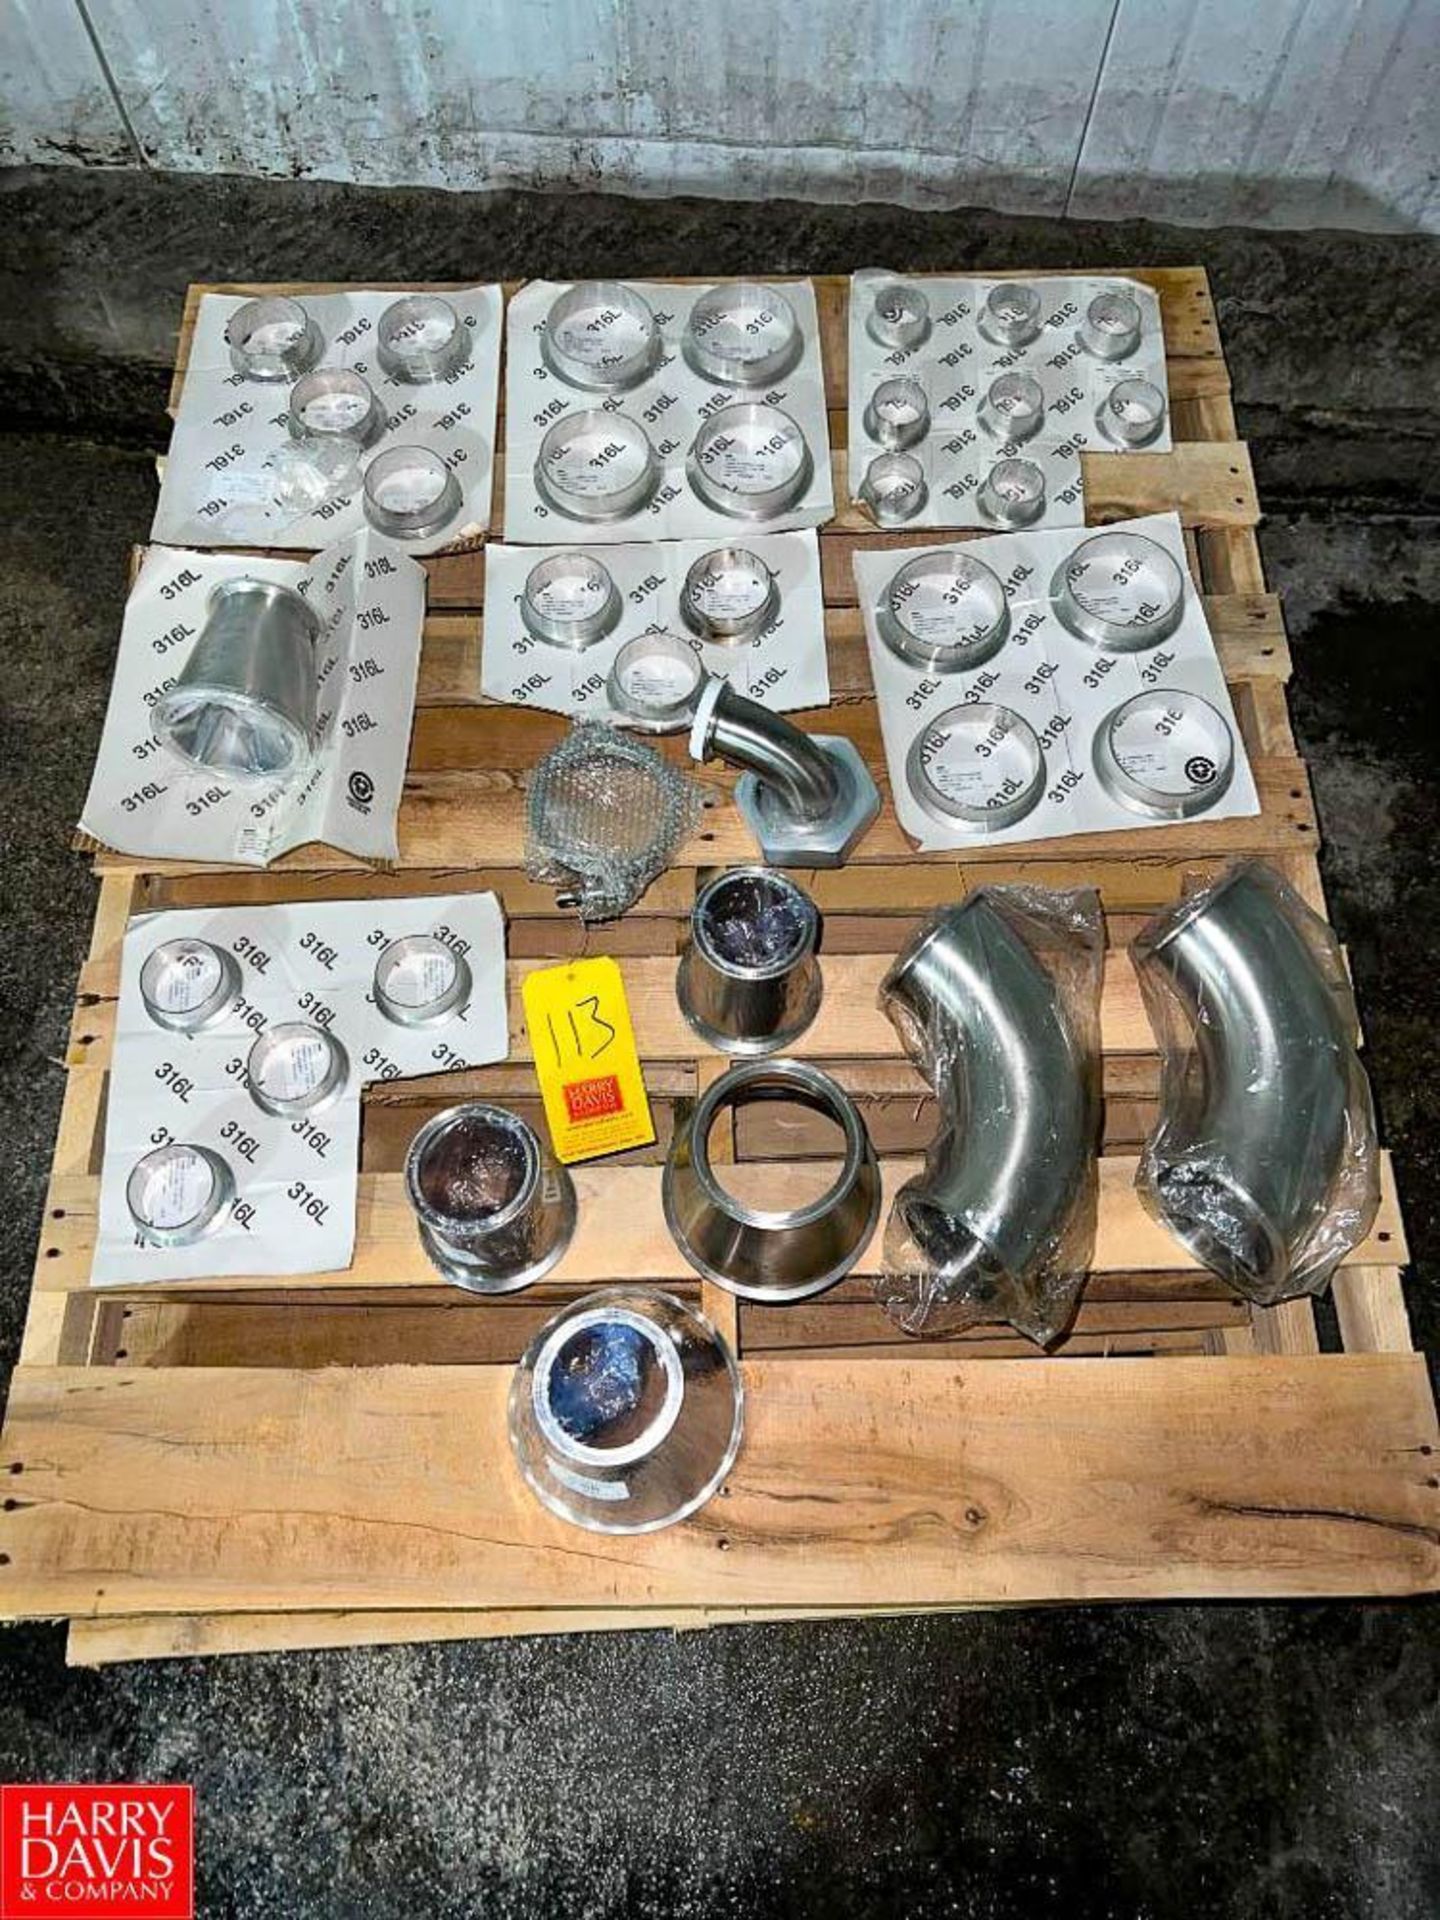 NEW S/S Flanges, Reducers, Elbows, 6" Clamp - Rigging Fee: $75 - Image 2 of 3